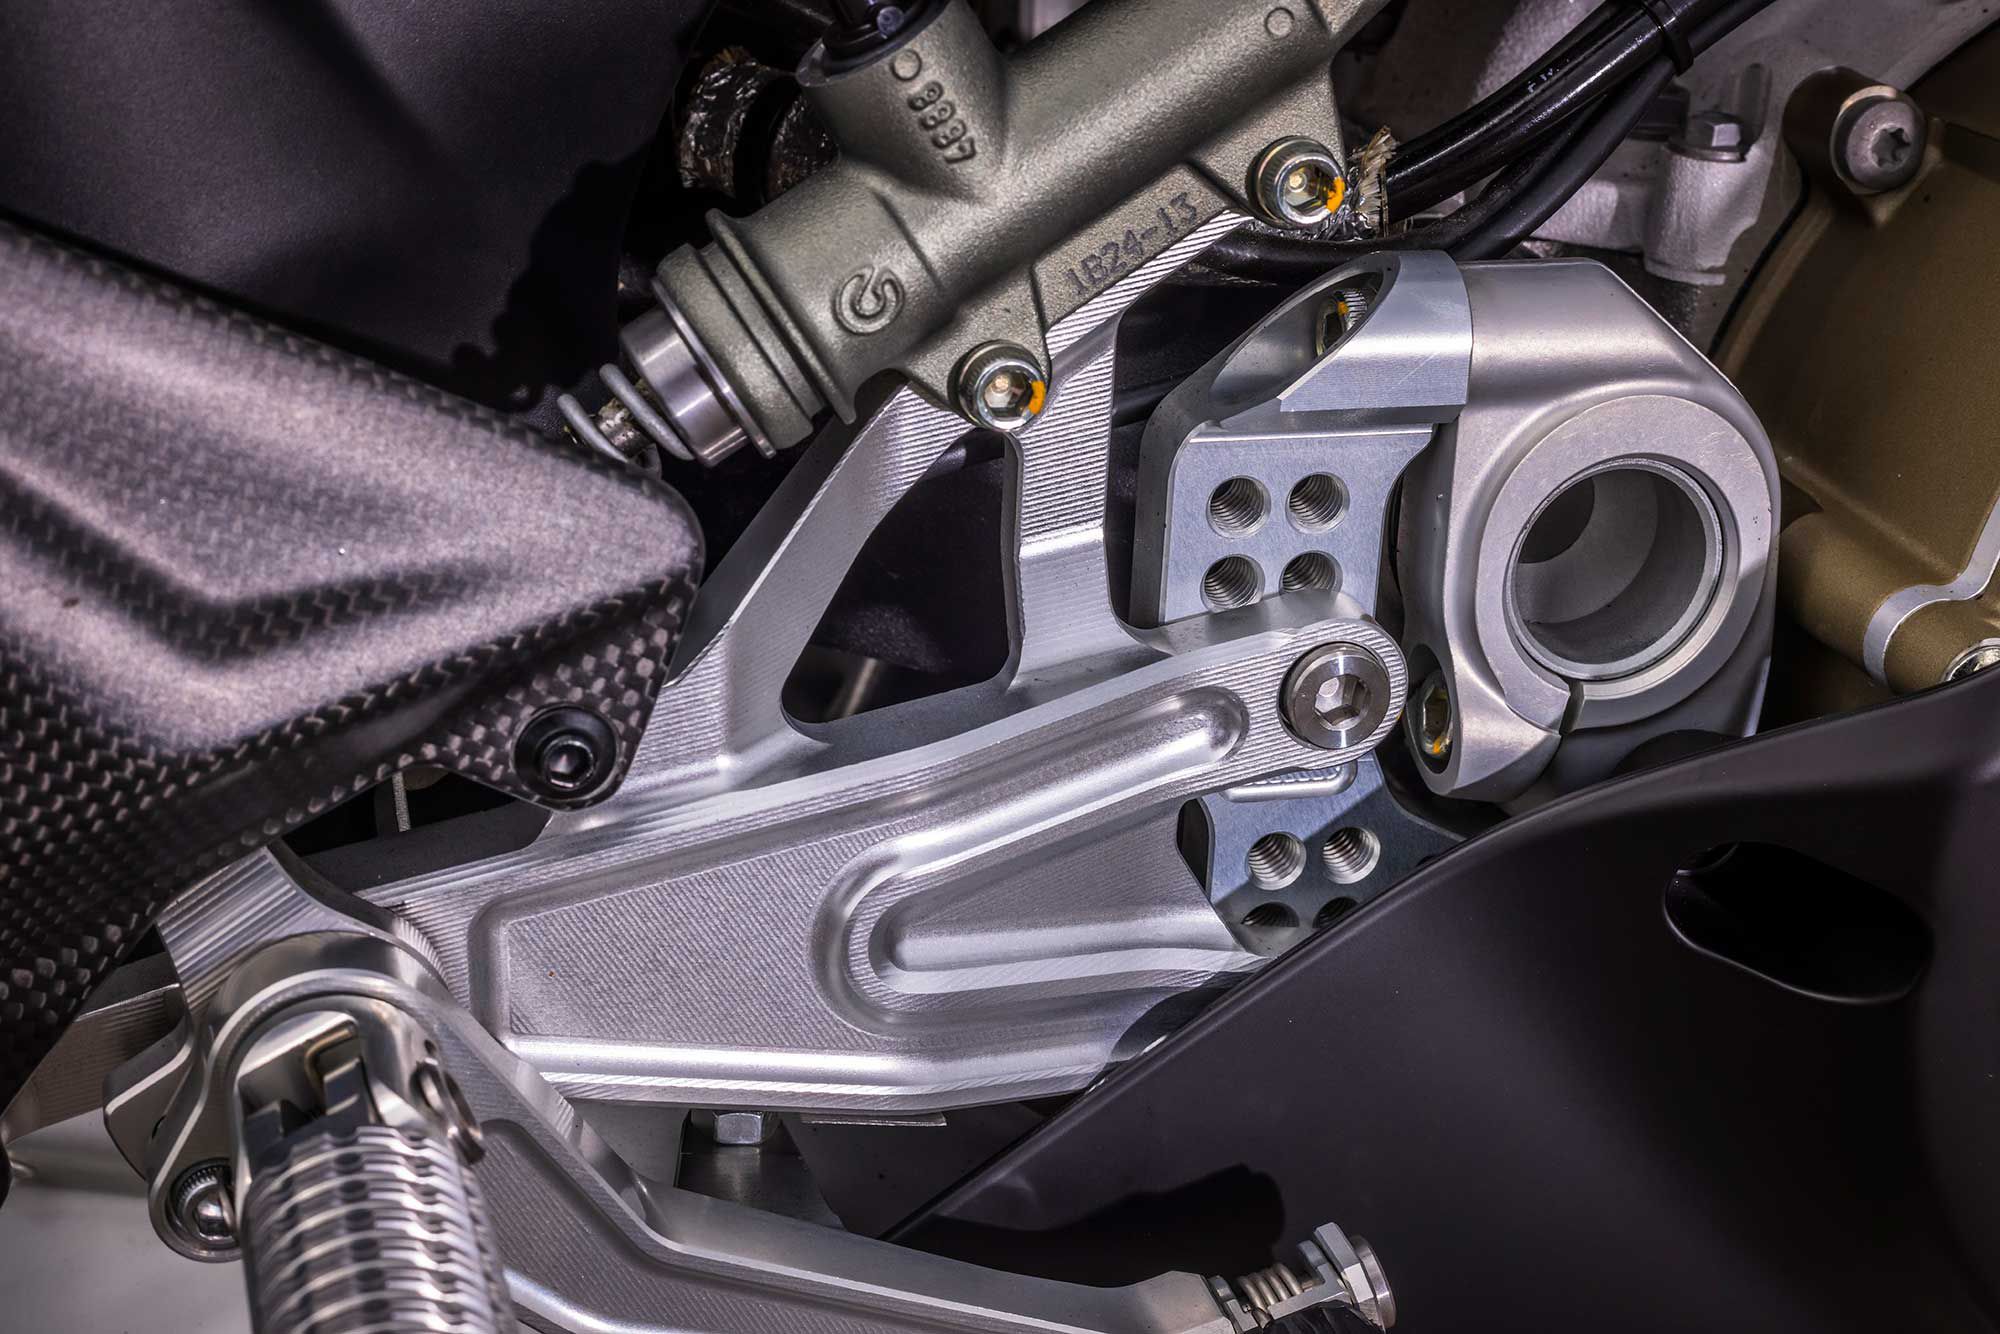 Billet aluminum footpegs with carbon heel plates and articulated brake and shift pedals to minimize the risk of breaking in the event of a slide. The gear selector can be quickly reversed to a race shift pattern.